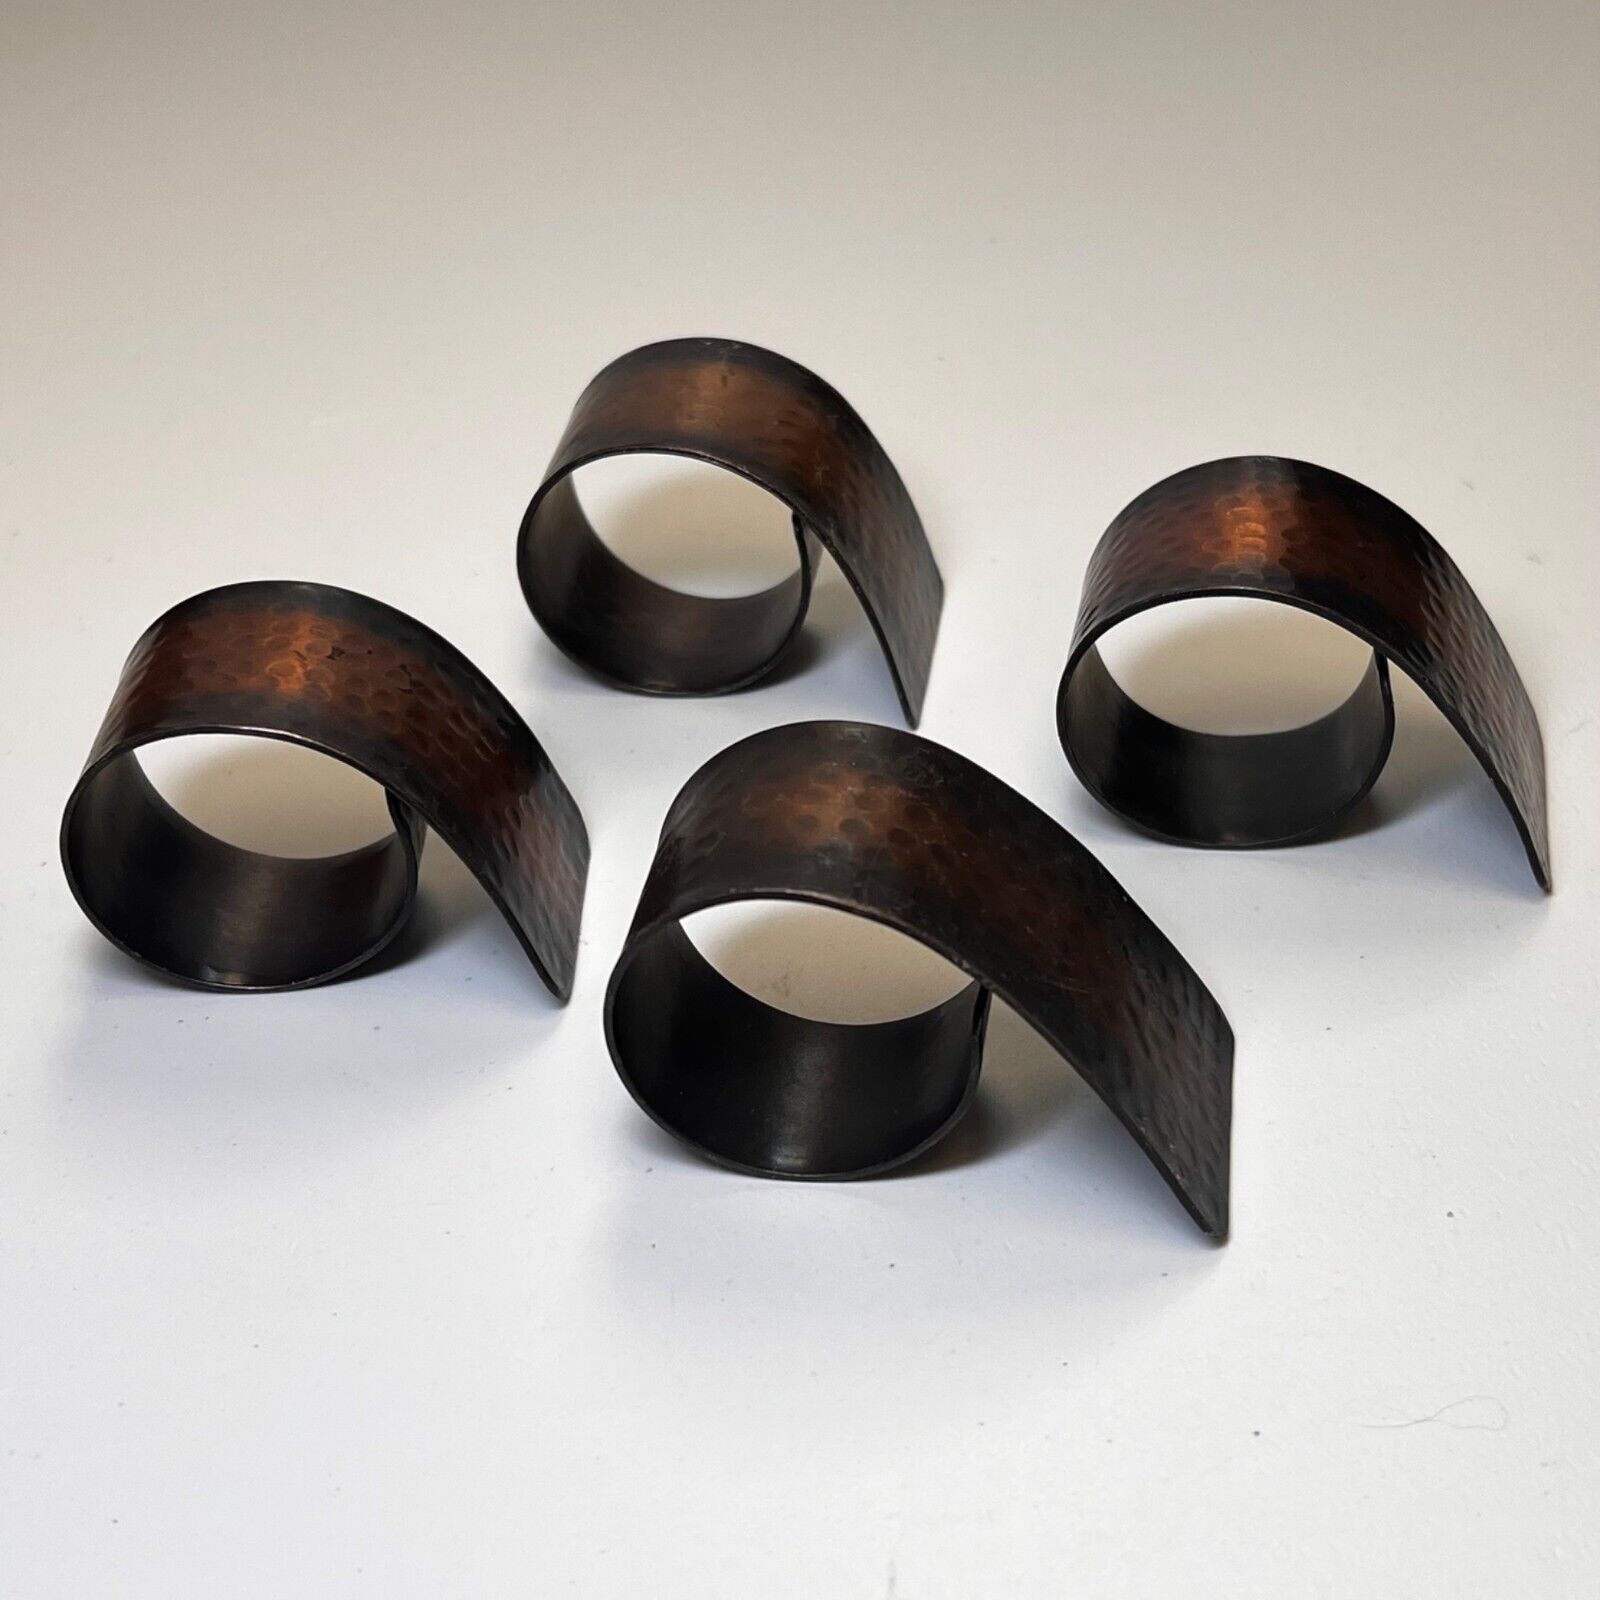 Set Of 4 Vintage Hammered Copper Napkin Rings - Rustic Table Home Kitchen Decor